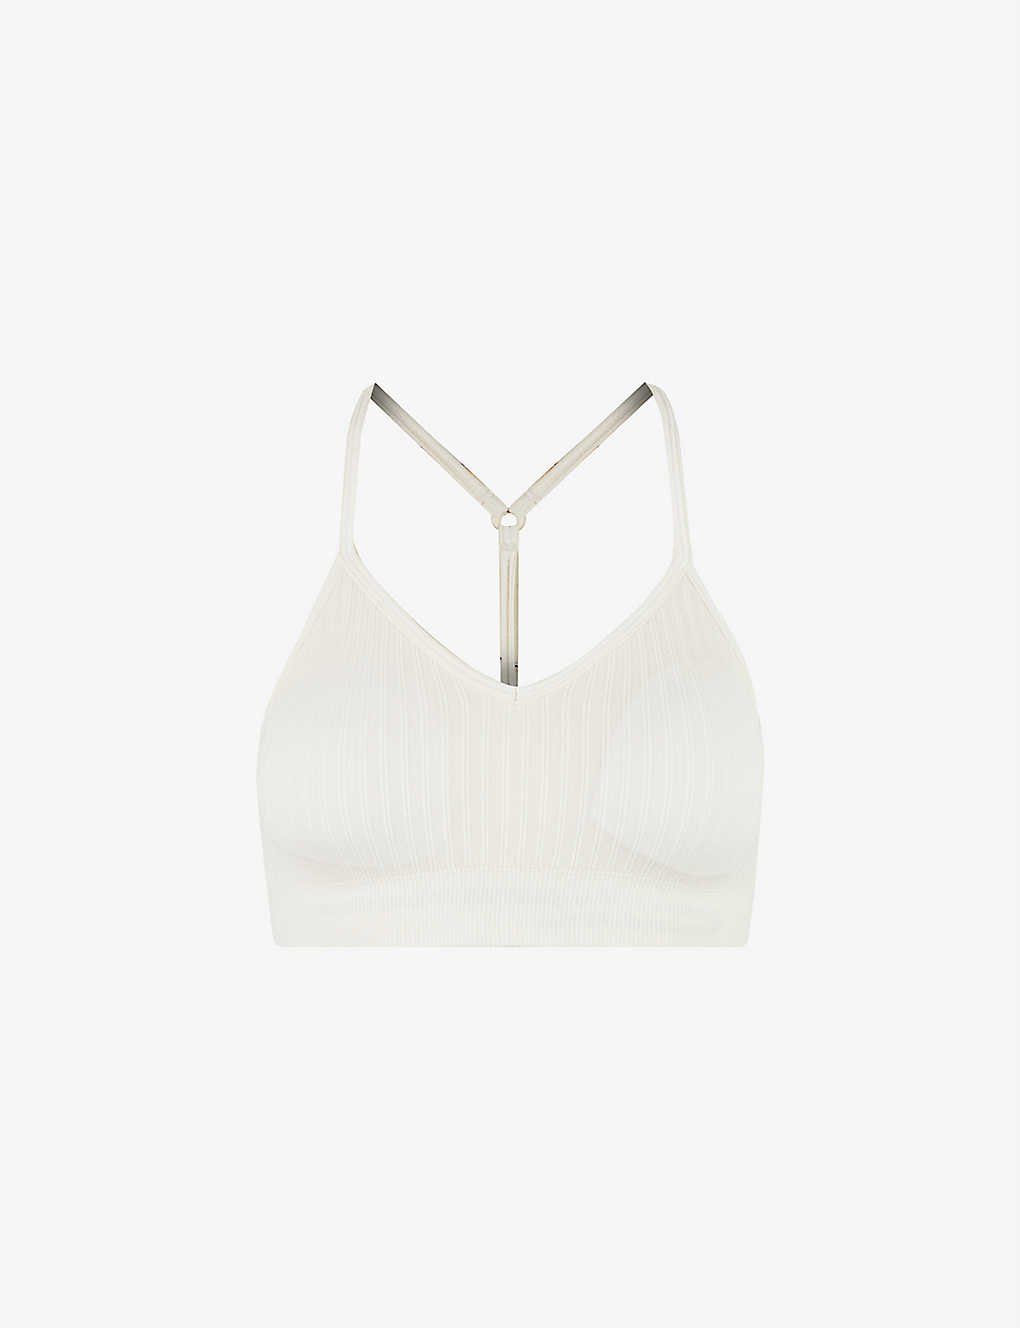 OFF-WHITE Off Stamp ribbed stretch sports bra